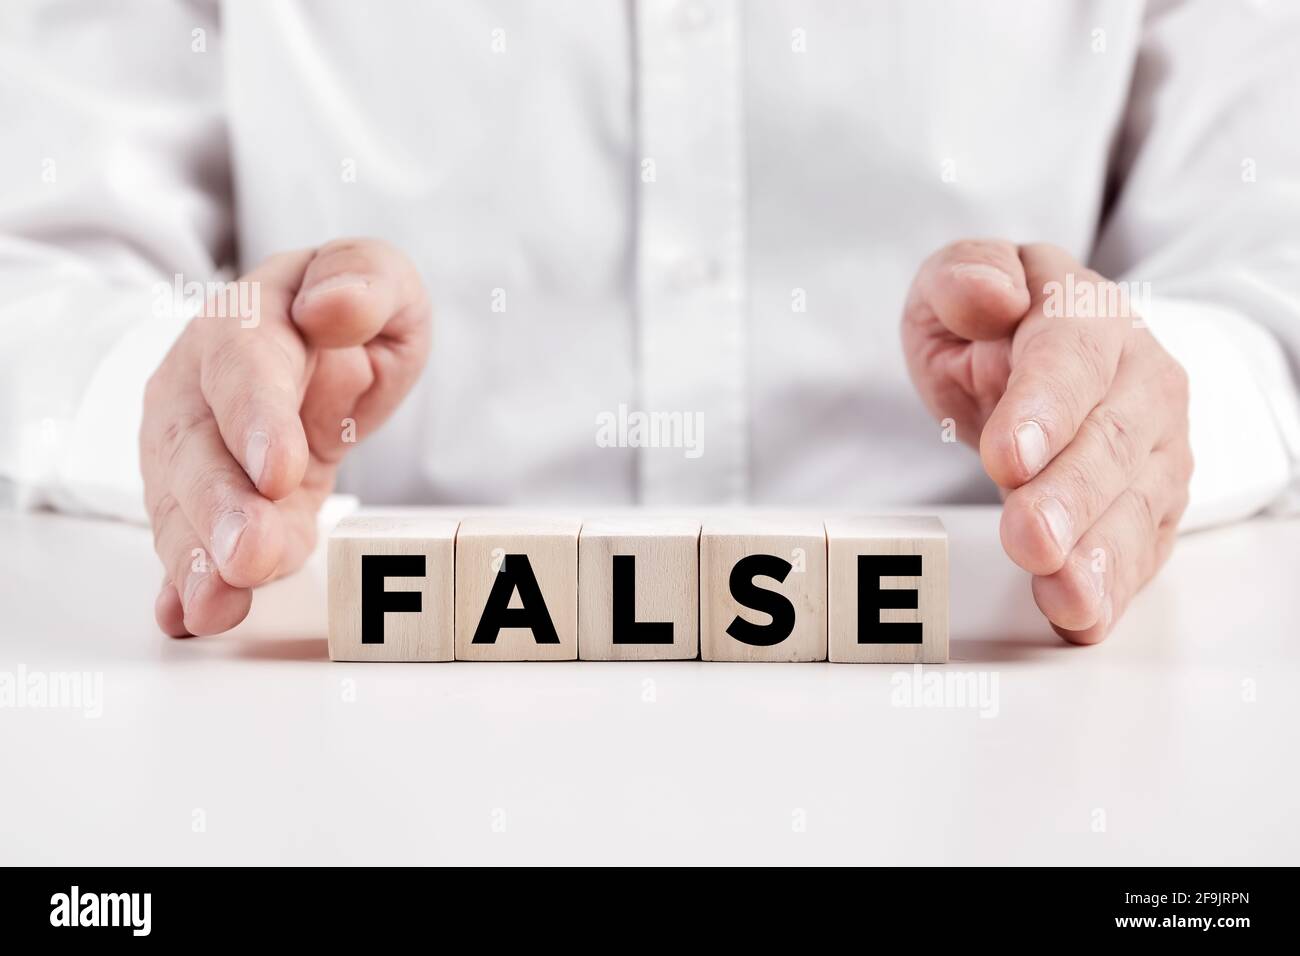 Businessman hands covers the wooden cubes with the word false. Misleading information concept. Stock Photo